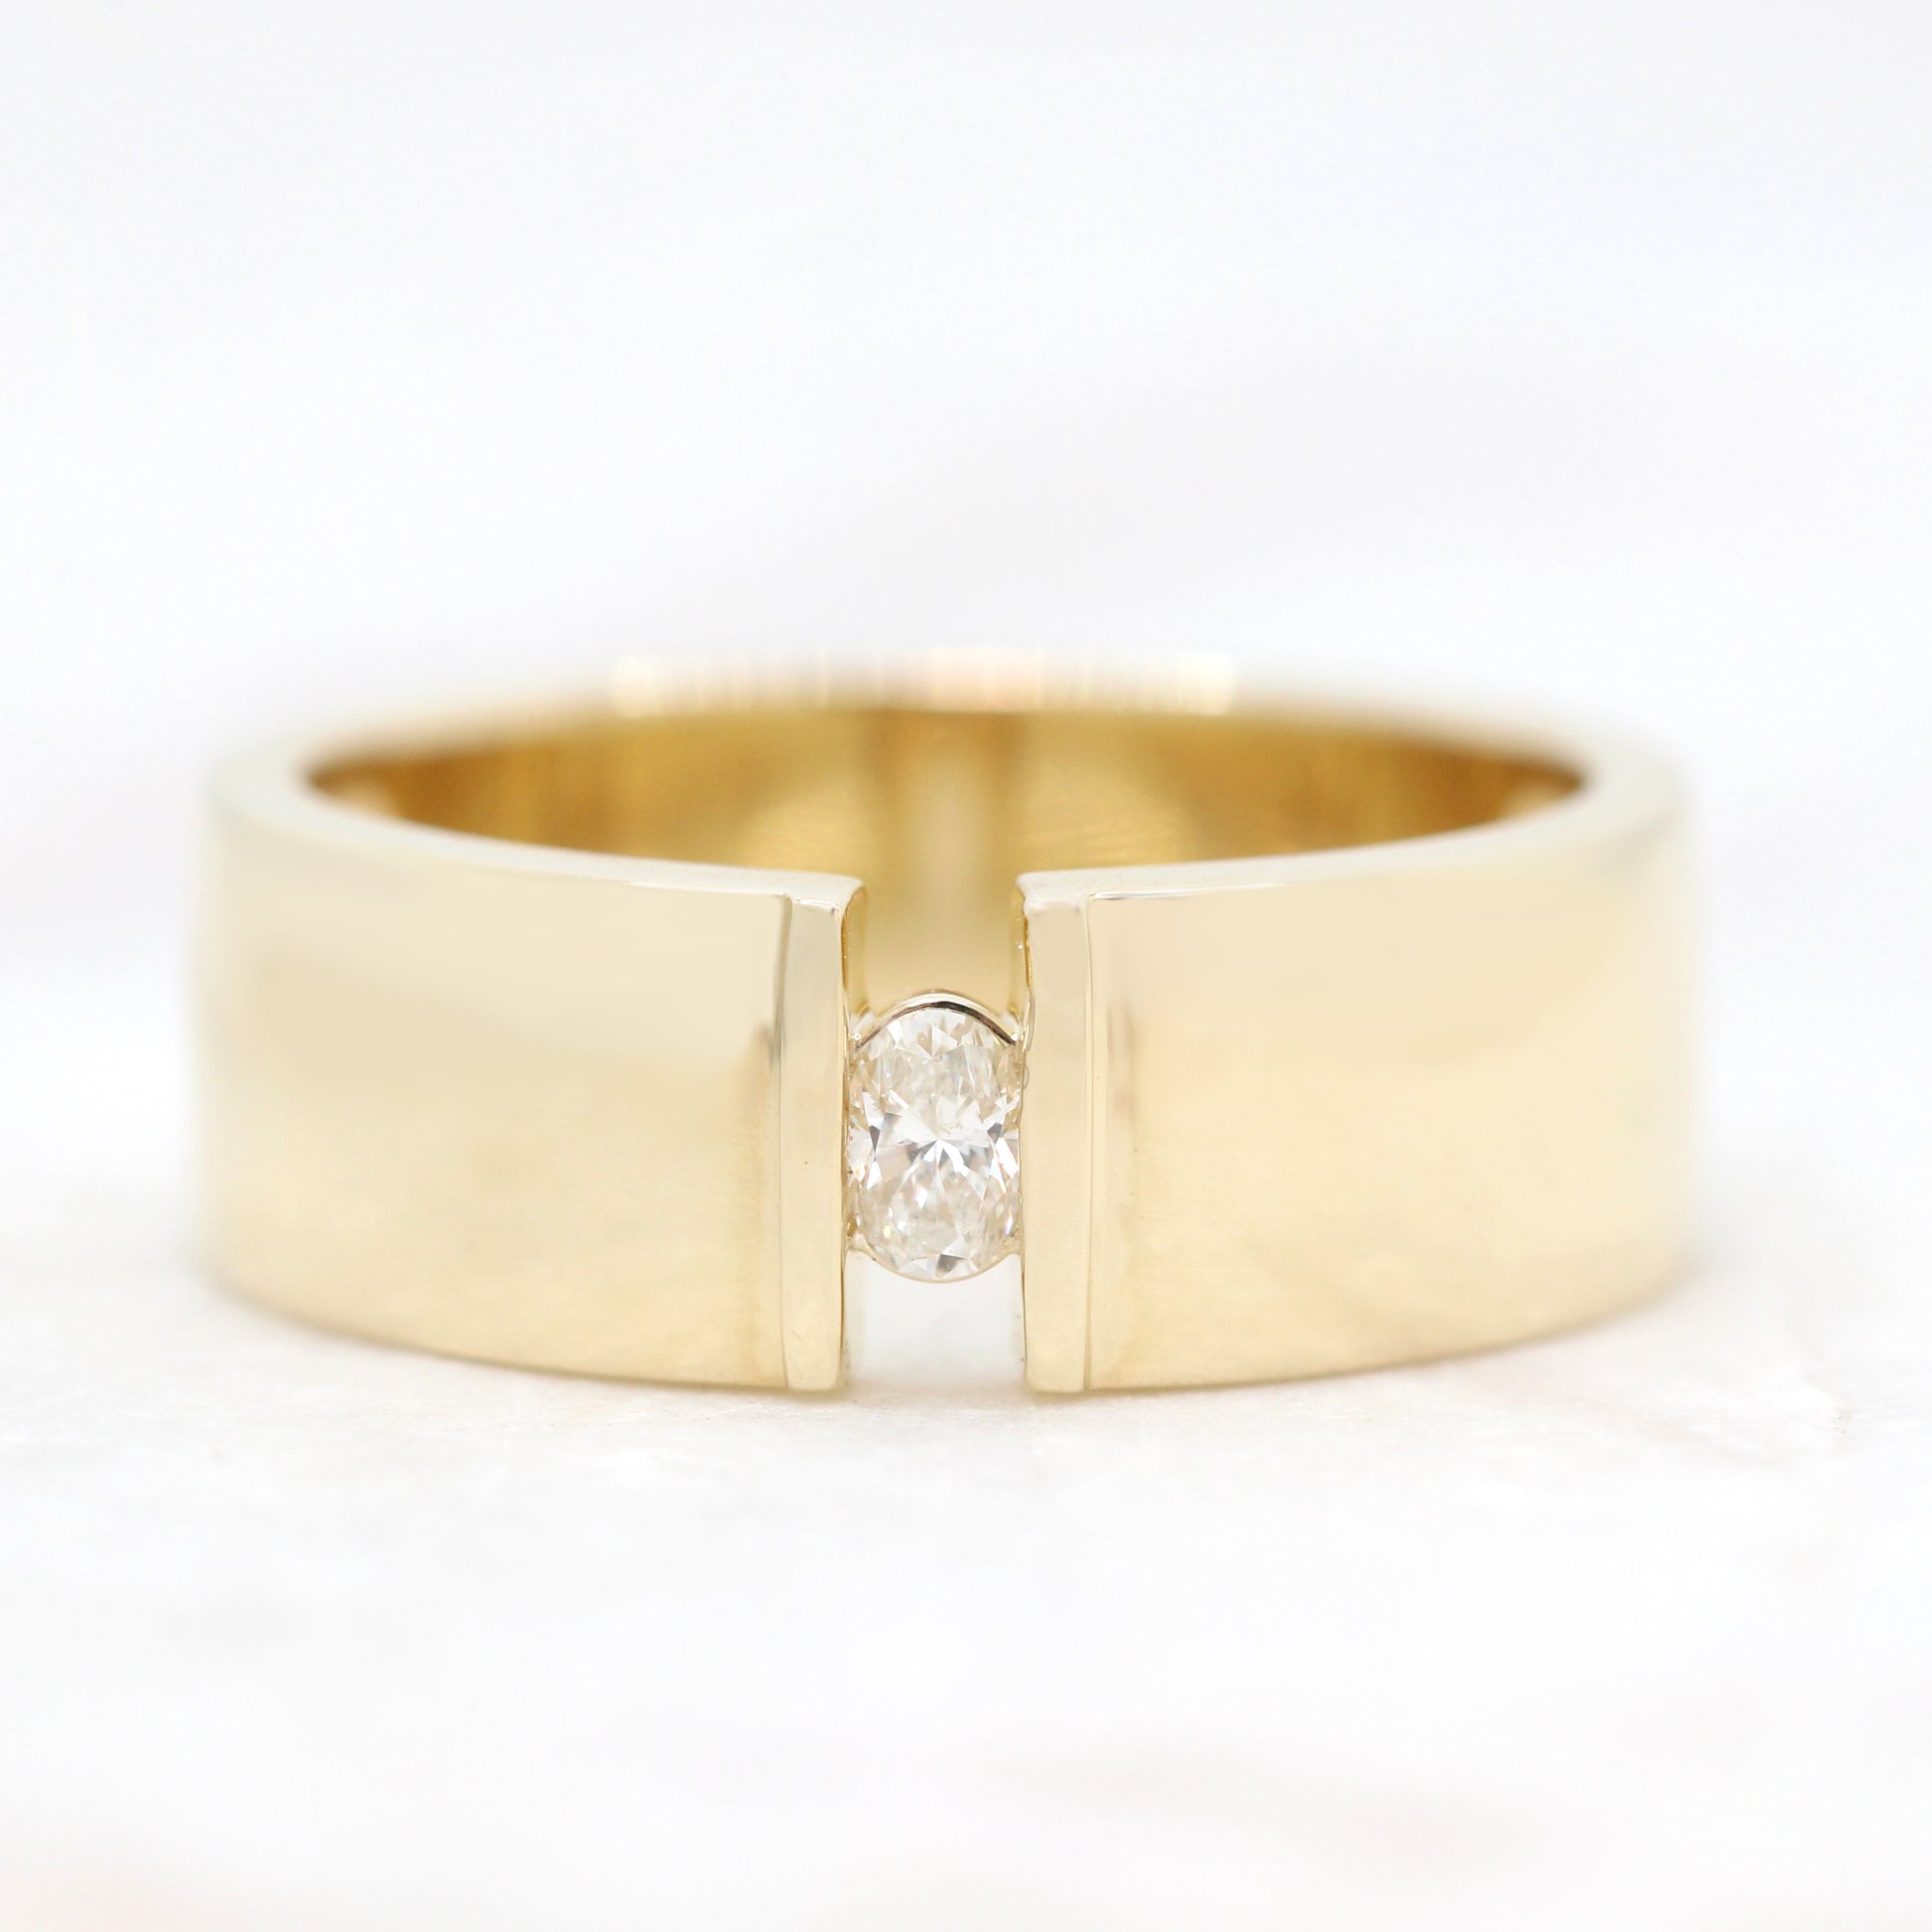 Sawyer - Unisex Diamond Wedding / Anniversary Band in Your Choice of 10k Gold - Midwinter Co. Alternative Bridal Rings and Modern Fine Jewelry